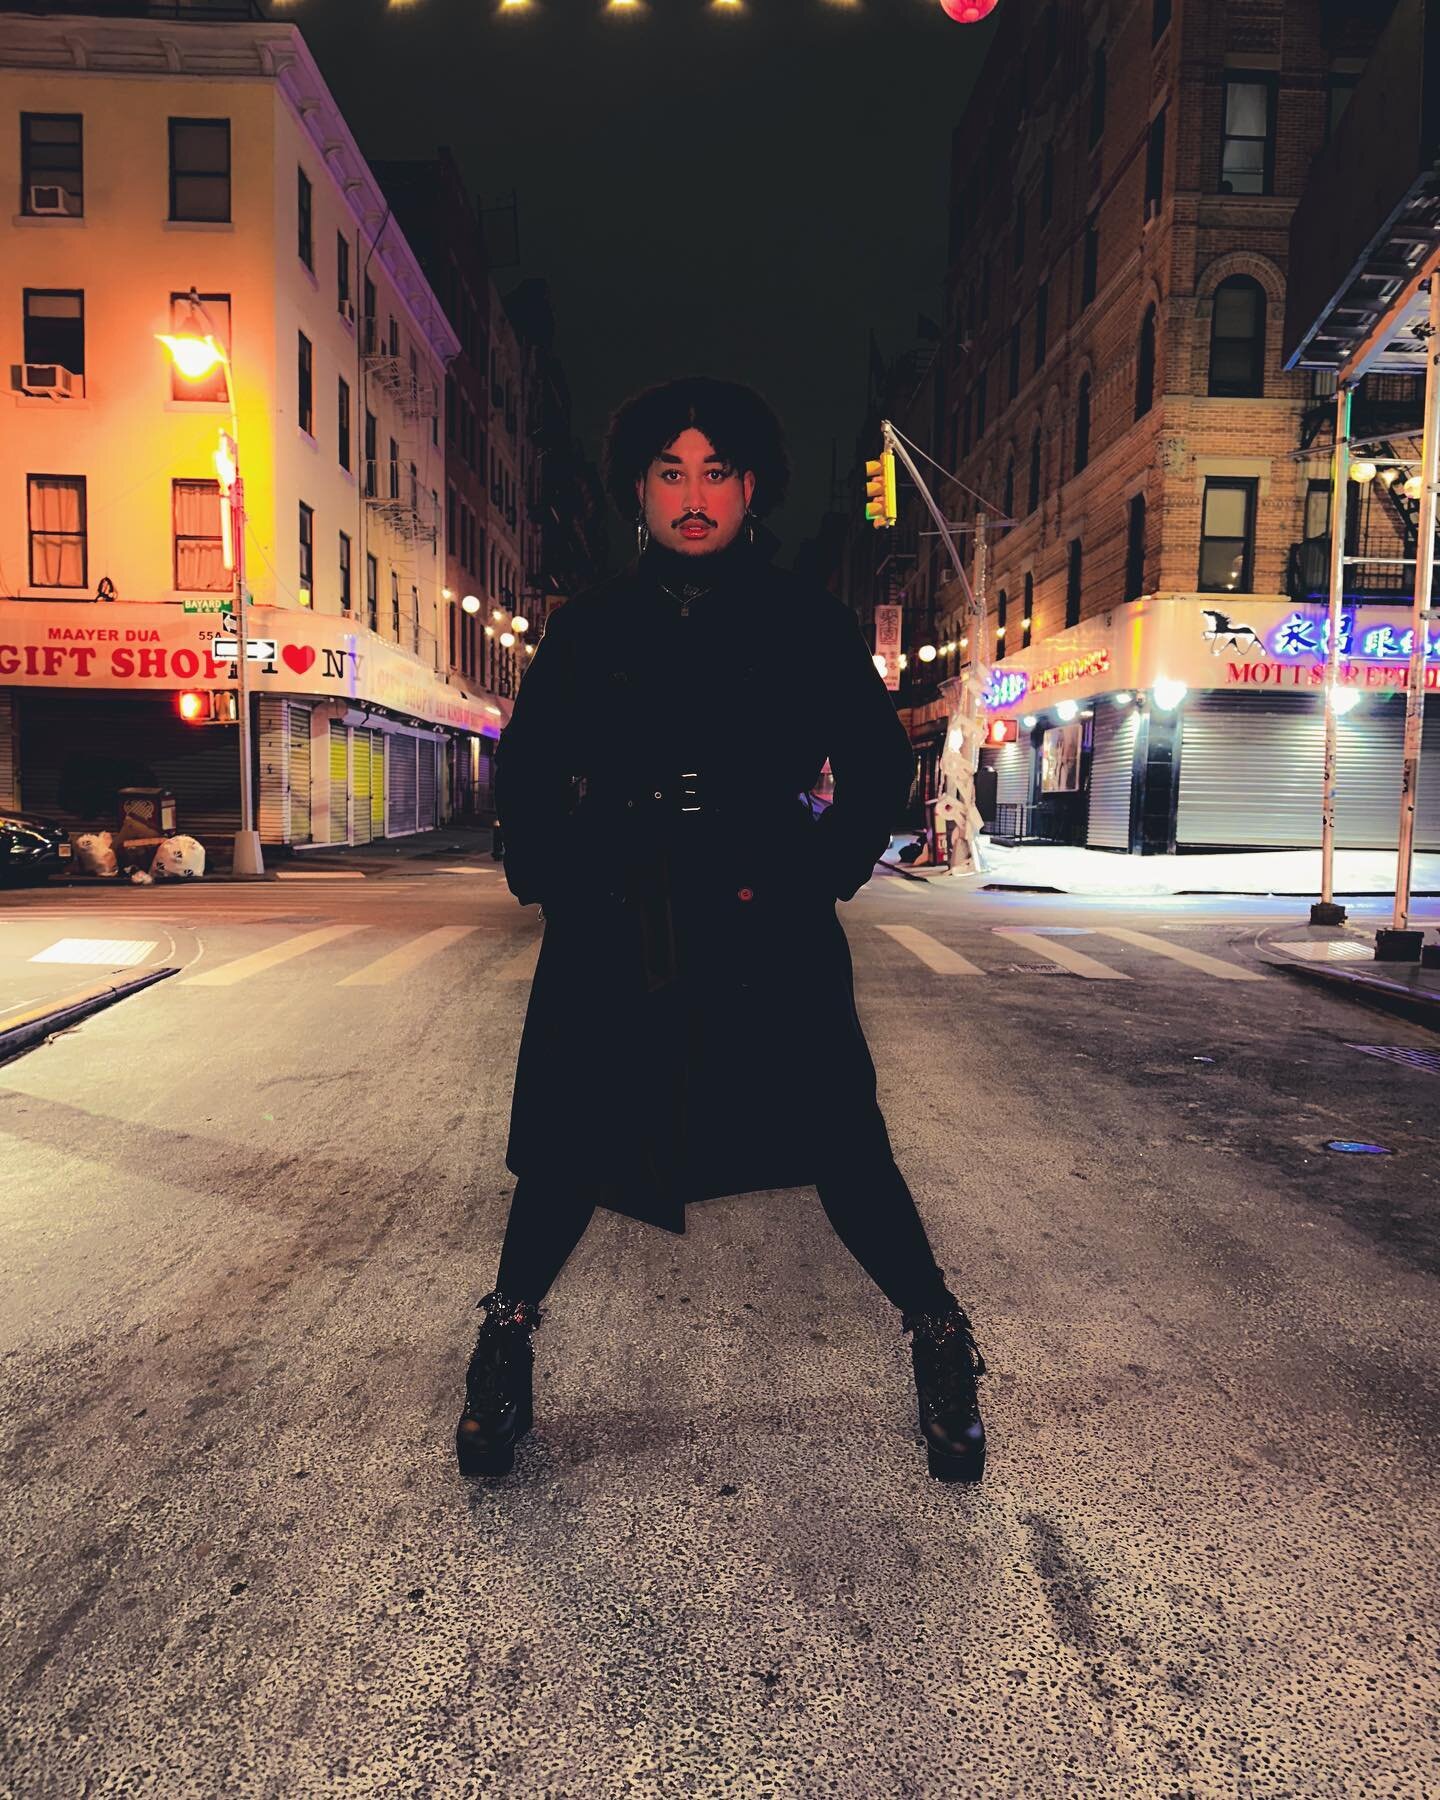 A Colorful Winter post 😏🖤

📸: @slicksooks 
Support and Hand by: @narls__ 

&bull;&bull;&bull;&bull; &bull;&bull;&bull;&bull;

#nyc #newyorkcity #newyork #fashion #streetphotography #photography #queer #queerfashion #nonbinary #enby #lgbt #black #c